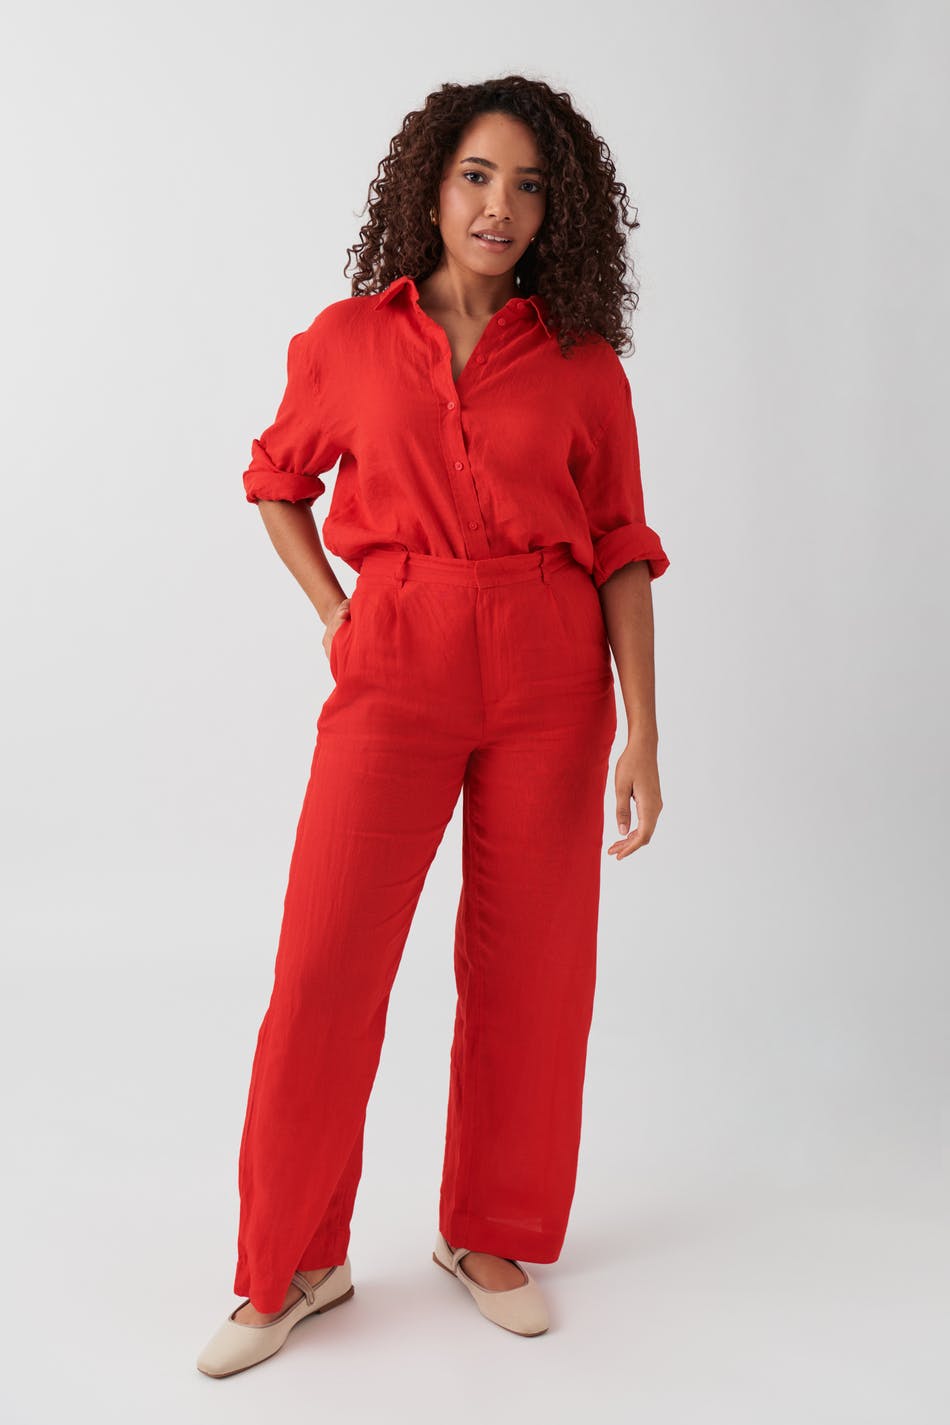 Gina Tricot - Linen trousers - linnebyxor - Red - XS - Female